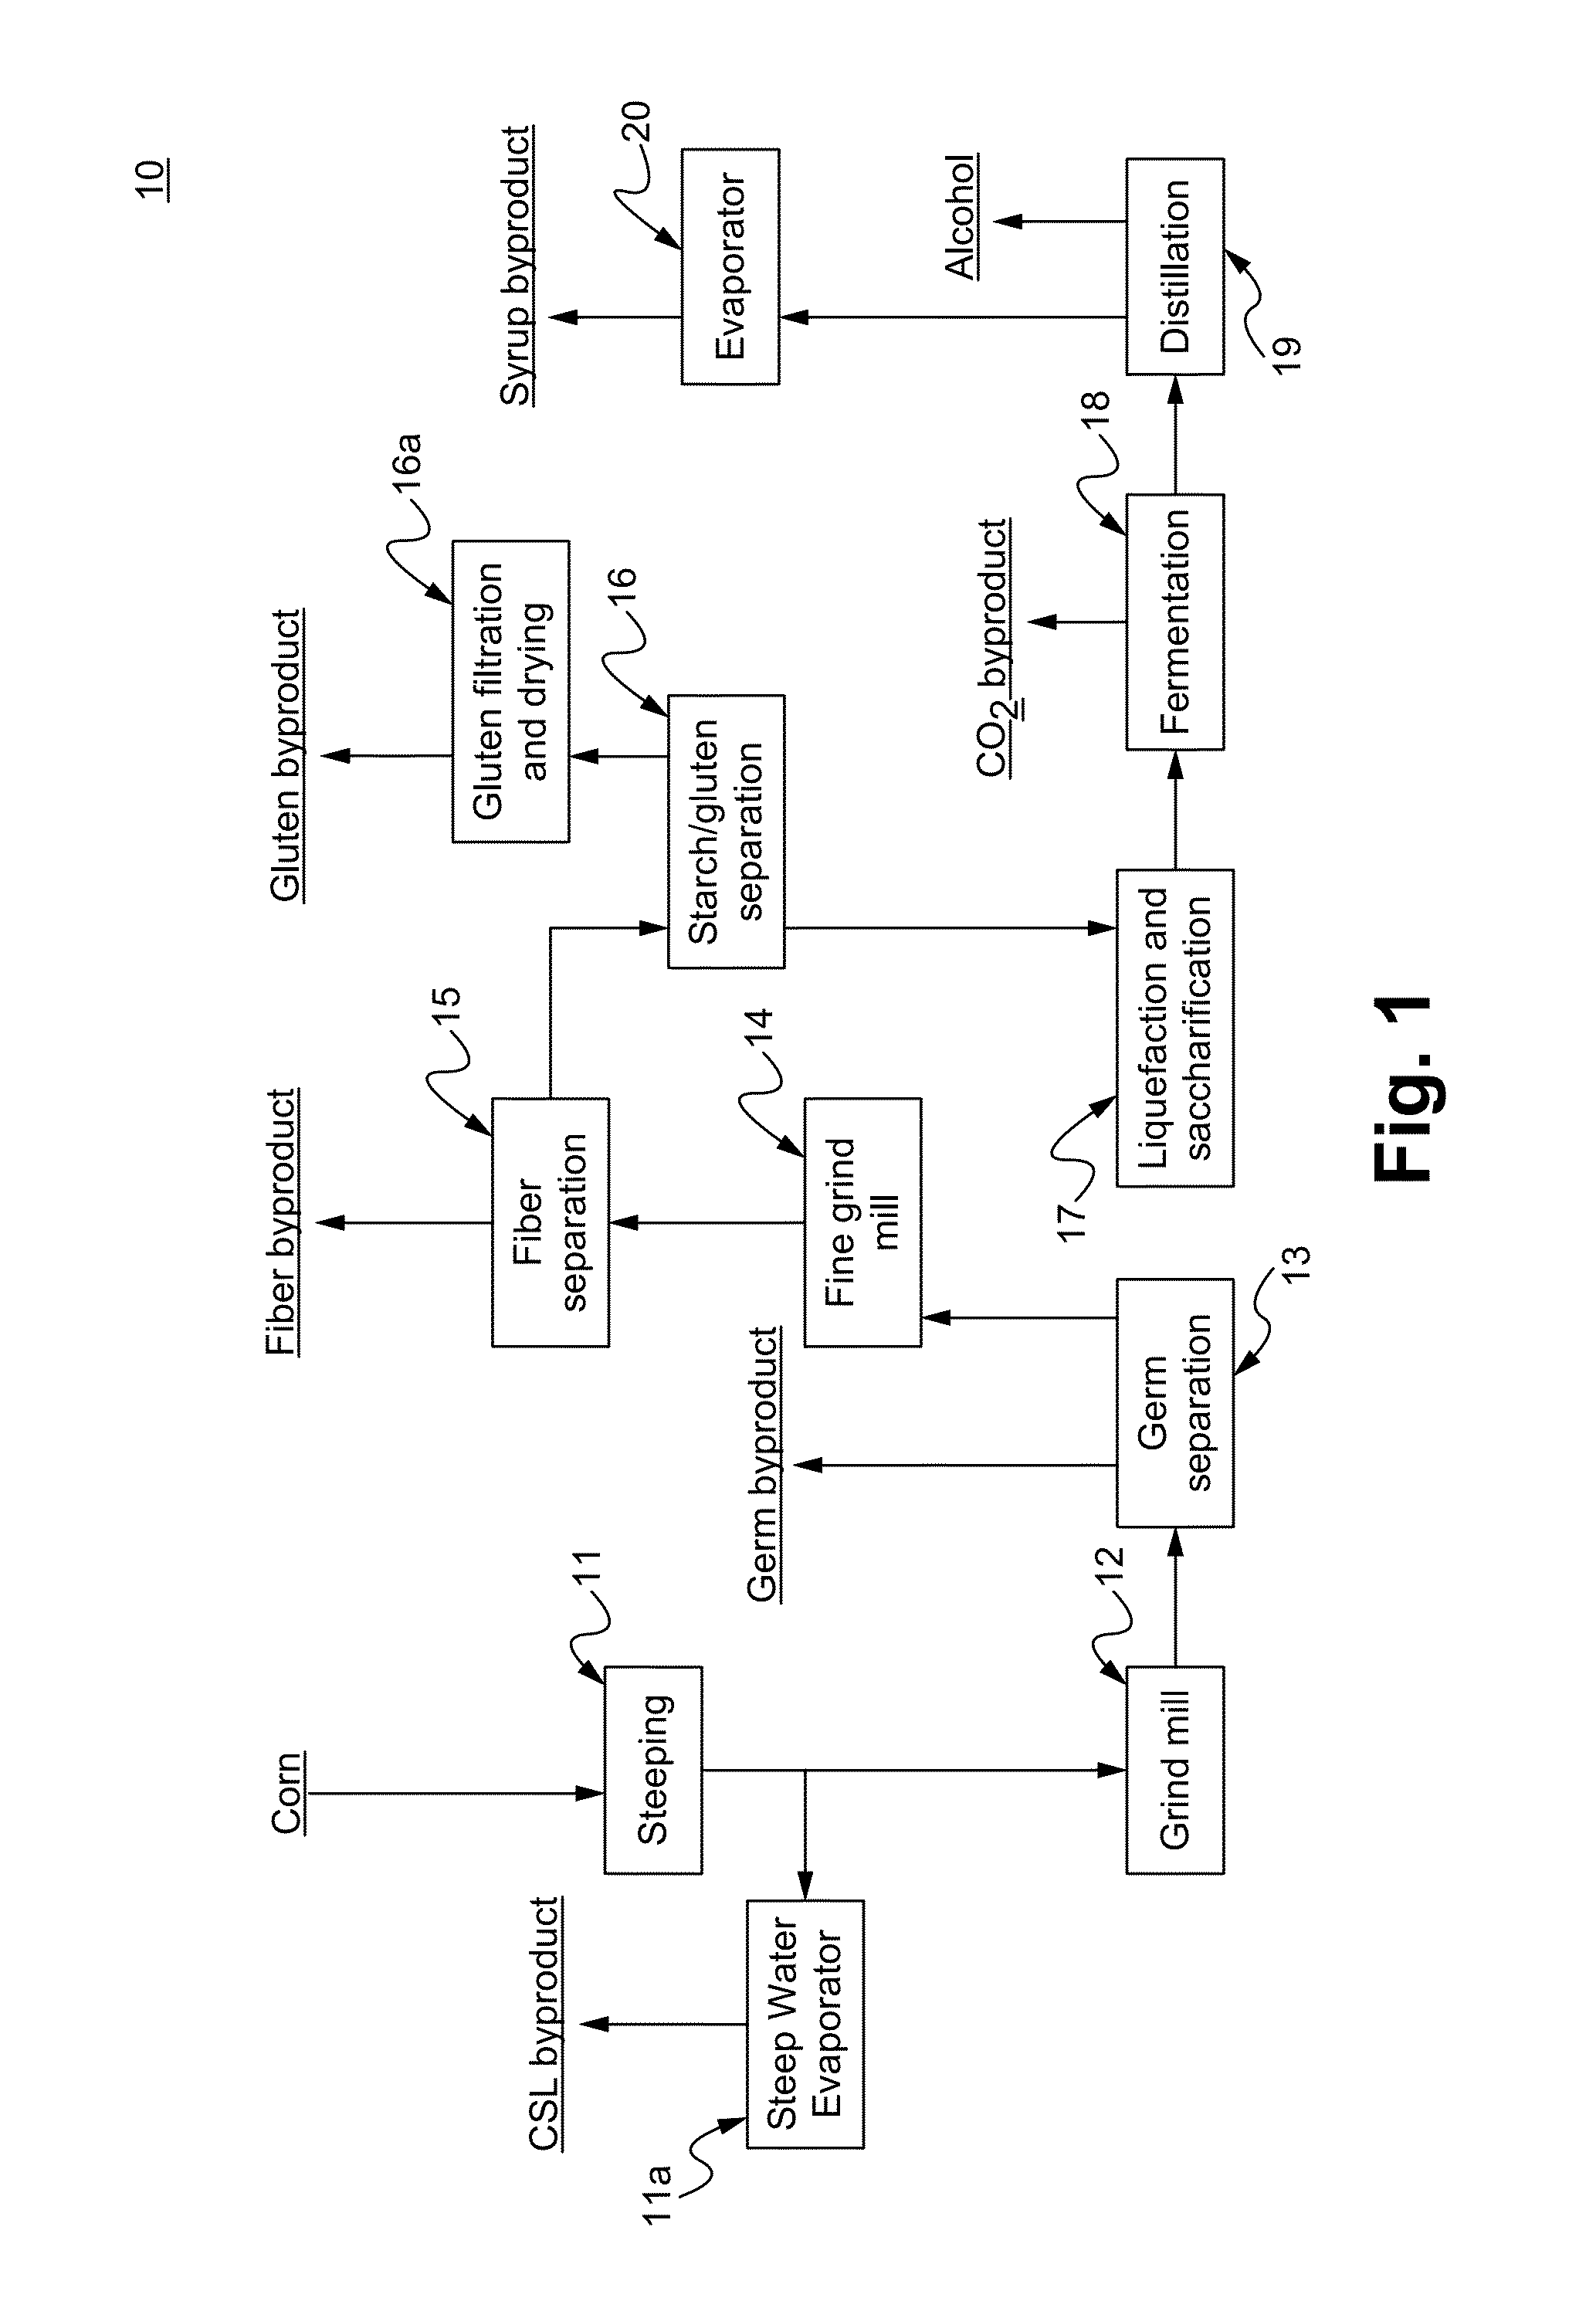 System for and method of separating pure starch from grains for alcohol production using a dry mill process